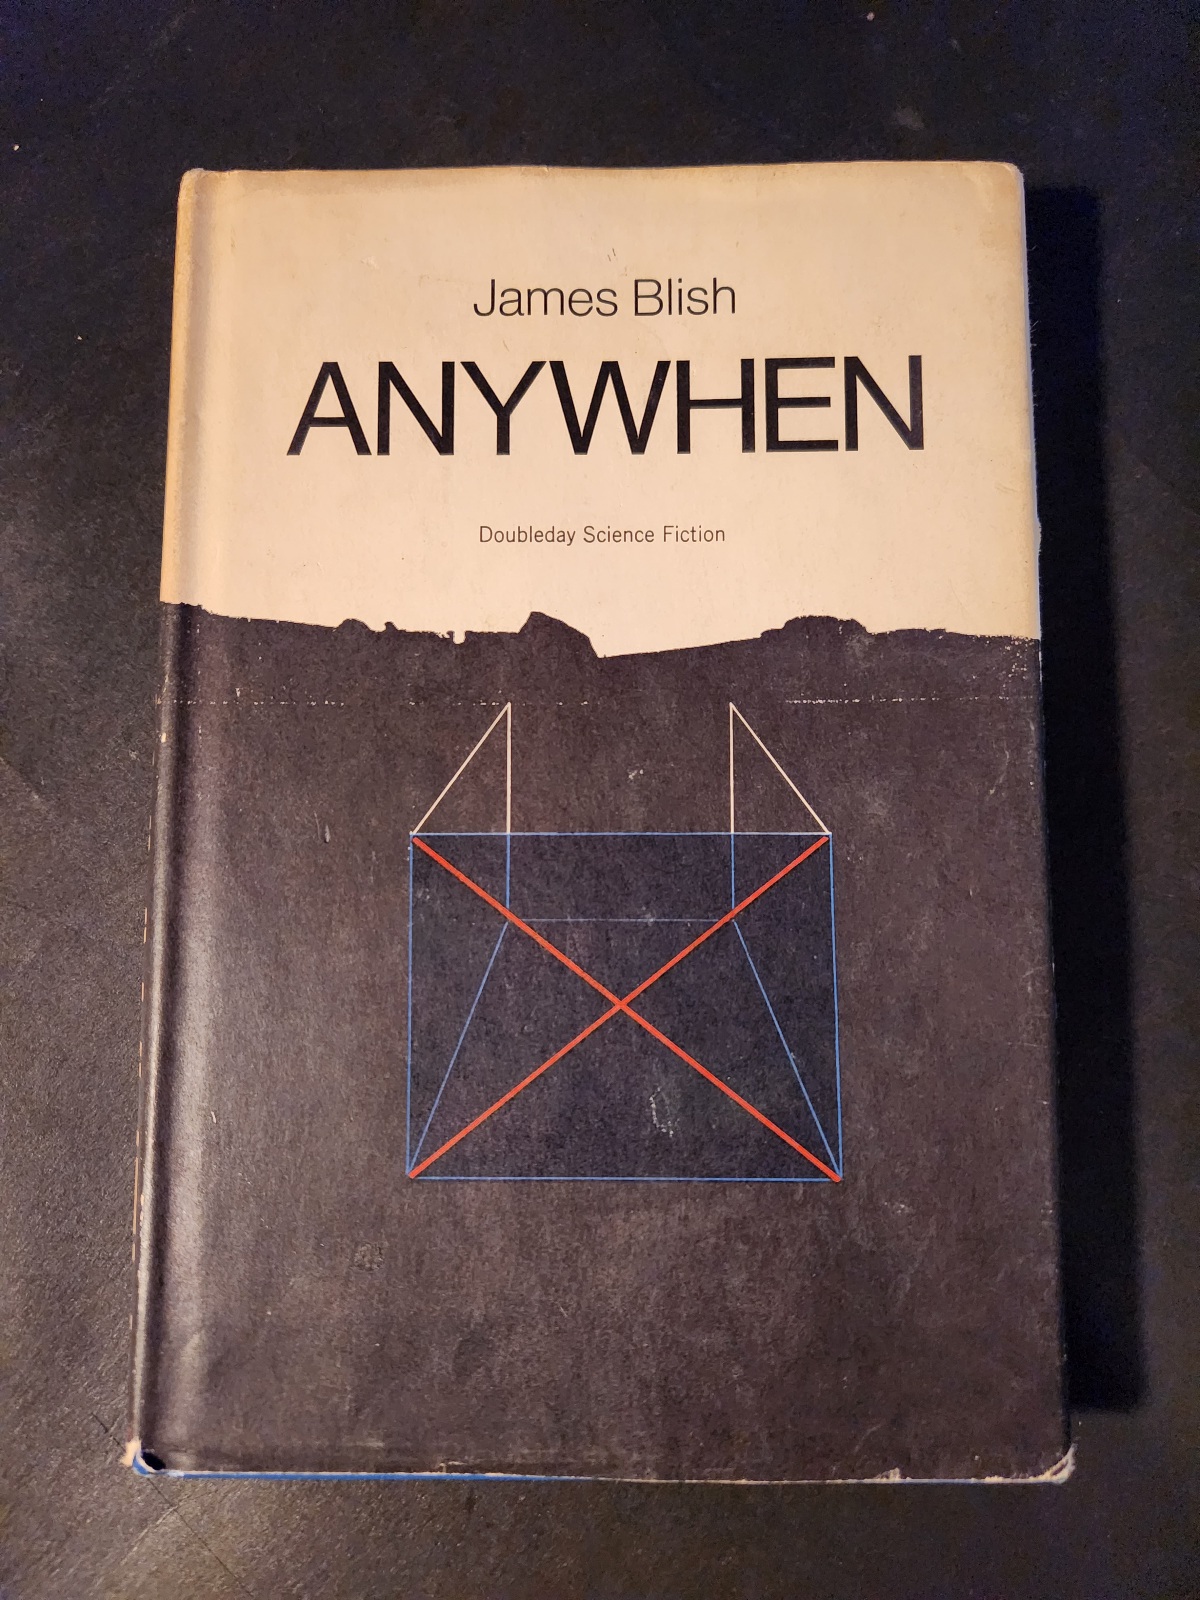 Anywhen by James Blish 1970 Doubleday Science Fiction Book Club Edition Hardcover